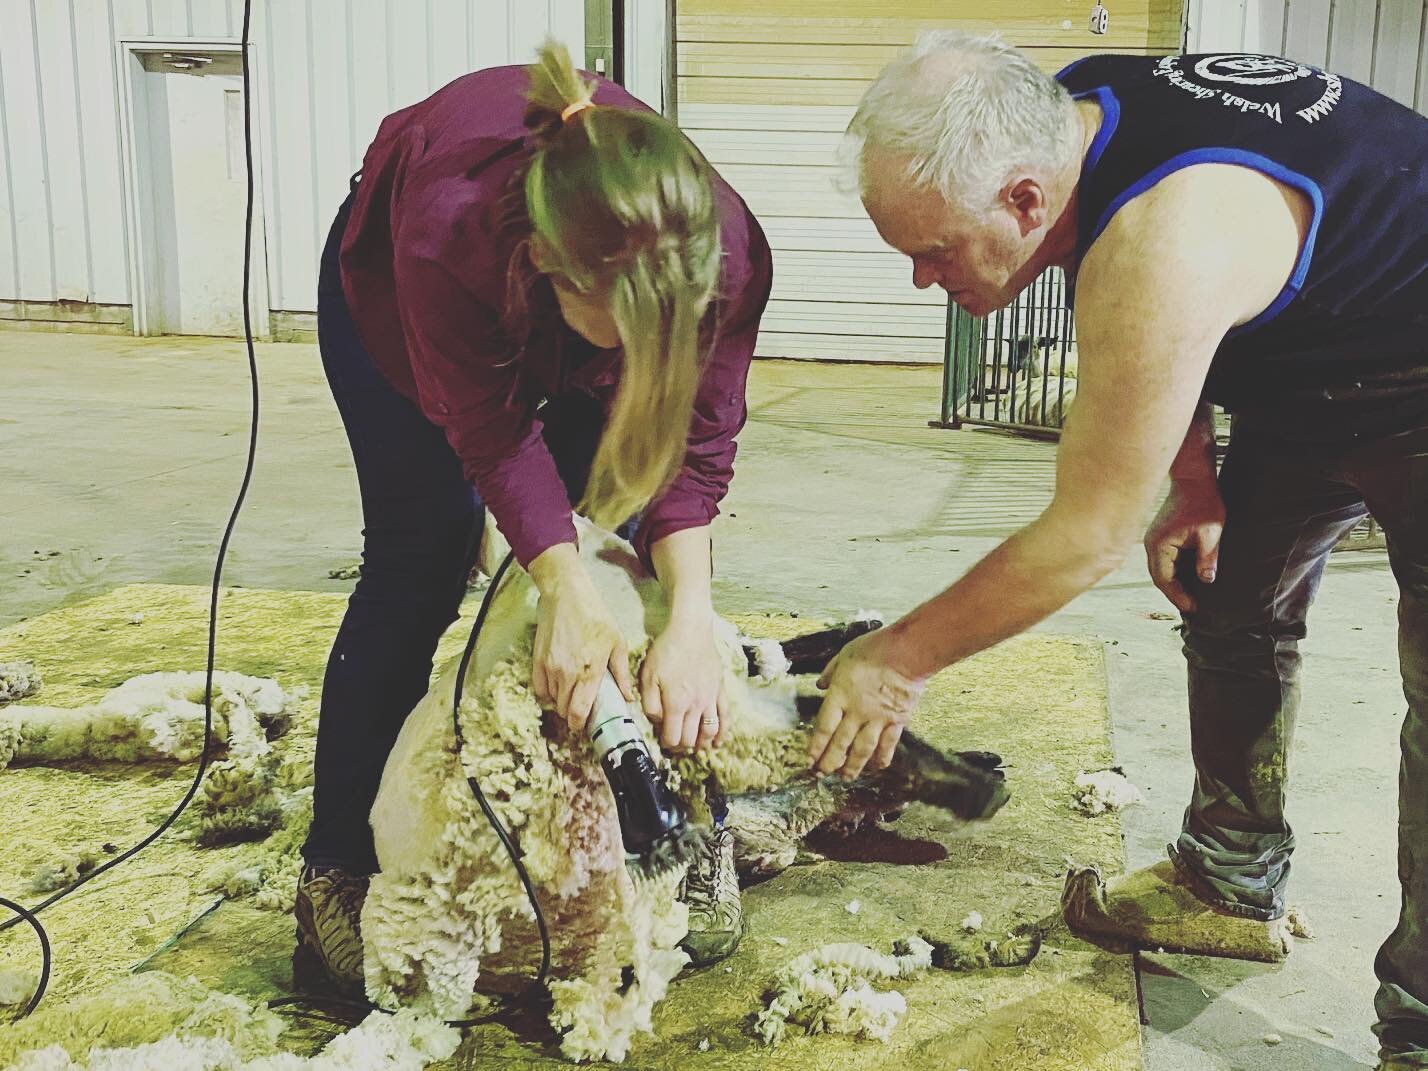 This is me shearing a sheep with the incredible instruction from  Doug Rathke of @lamb_shoppe 
This was challenging mentally and physically and made me truly appreciate the skill and strength of those who shear for a living. 
Now I am looking for she